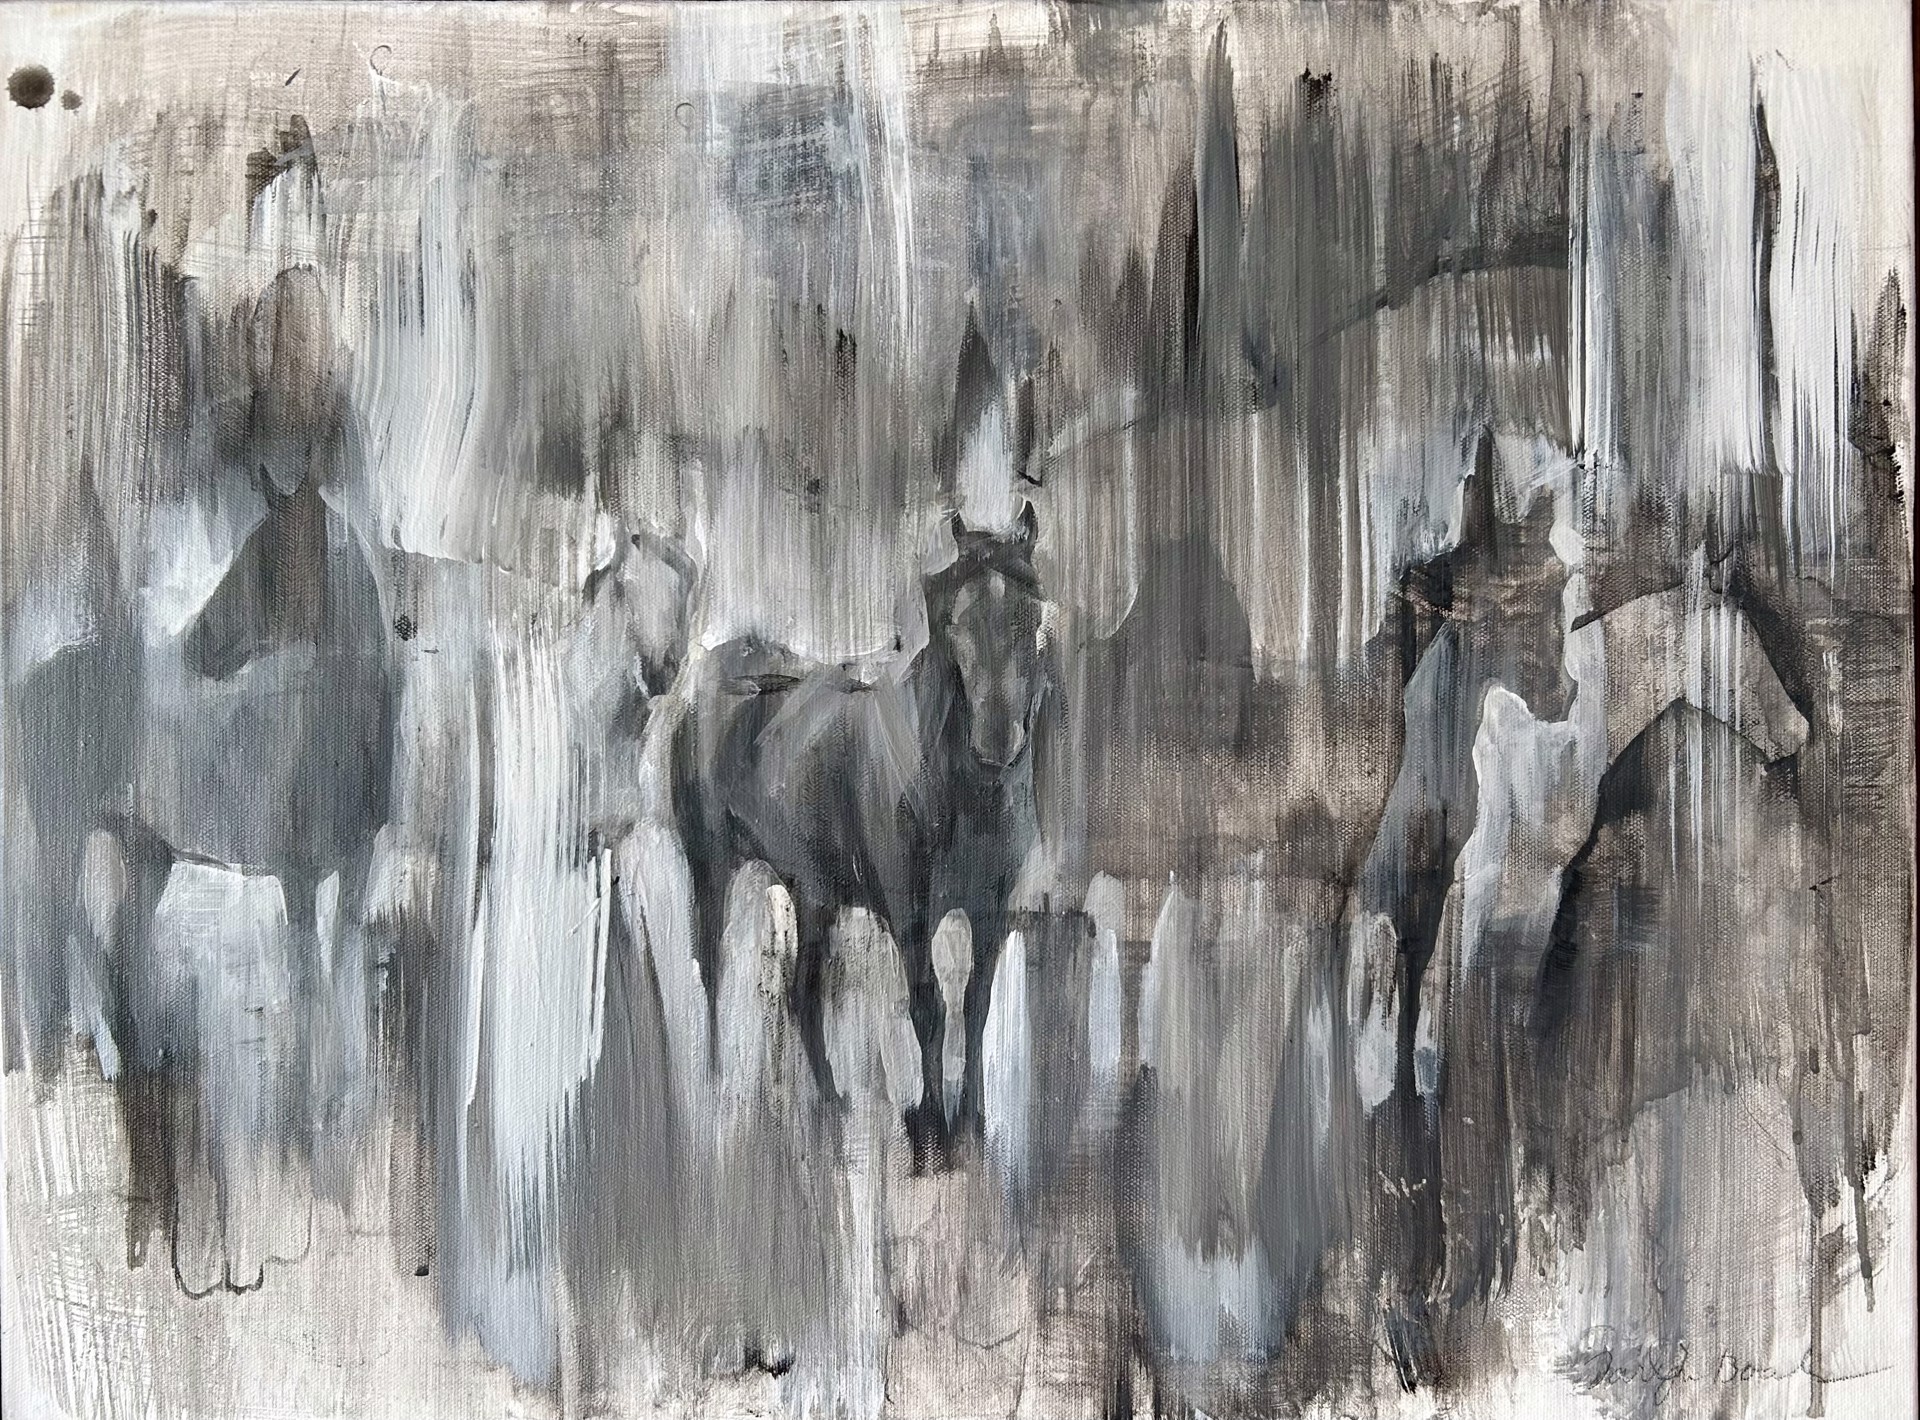 Original Acrylic Painting By Taryn Boals Featuring A Herd Of Elk In Shadows And Overlays In Black And White